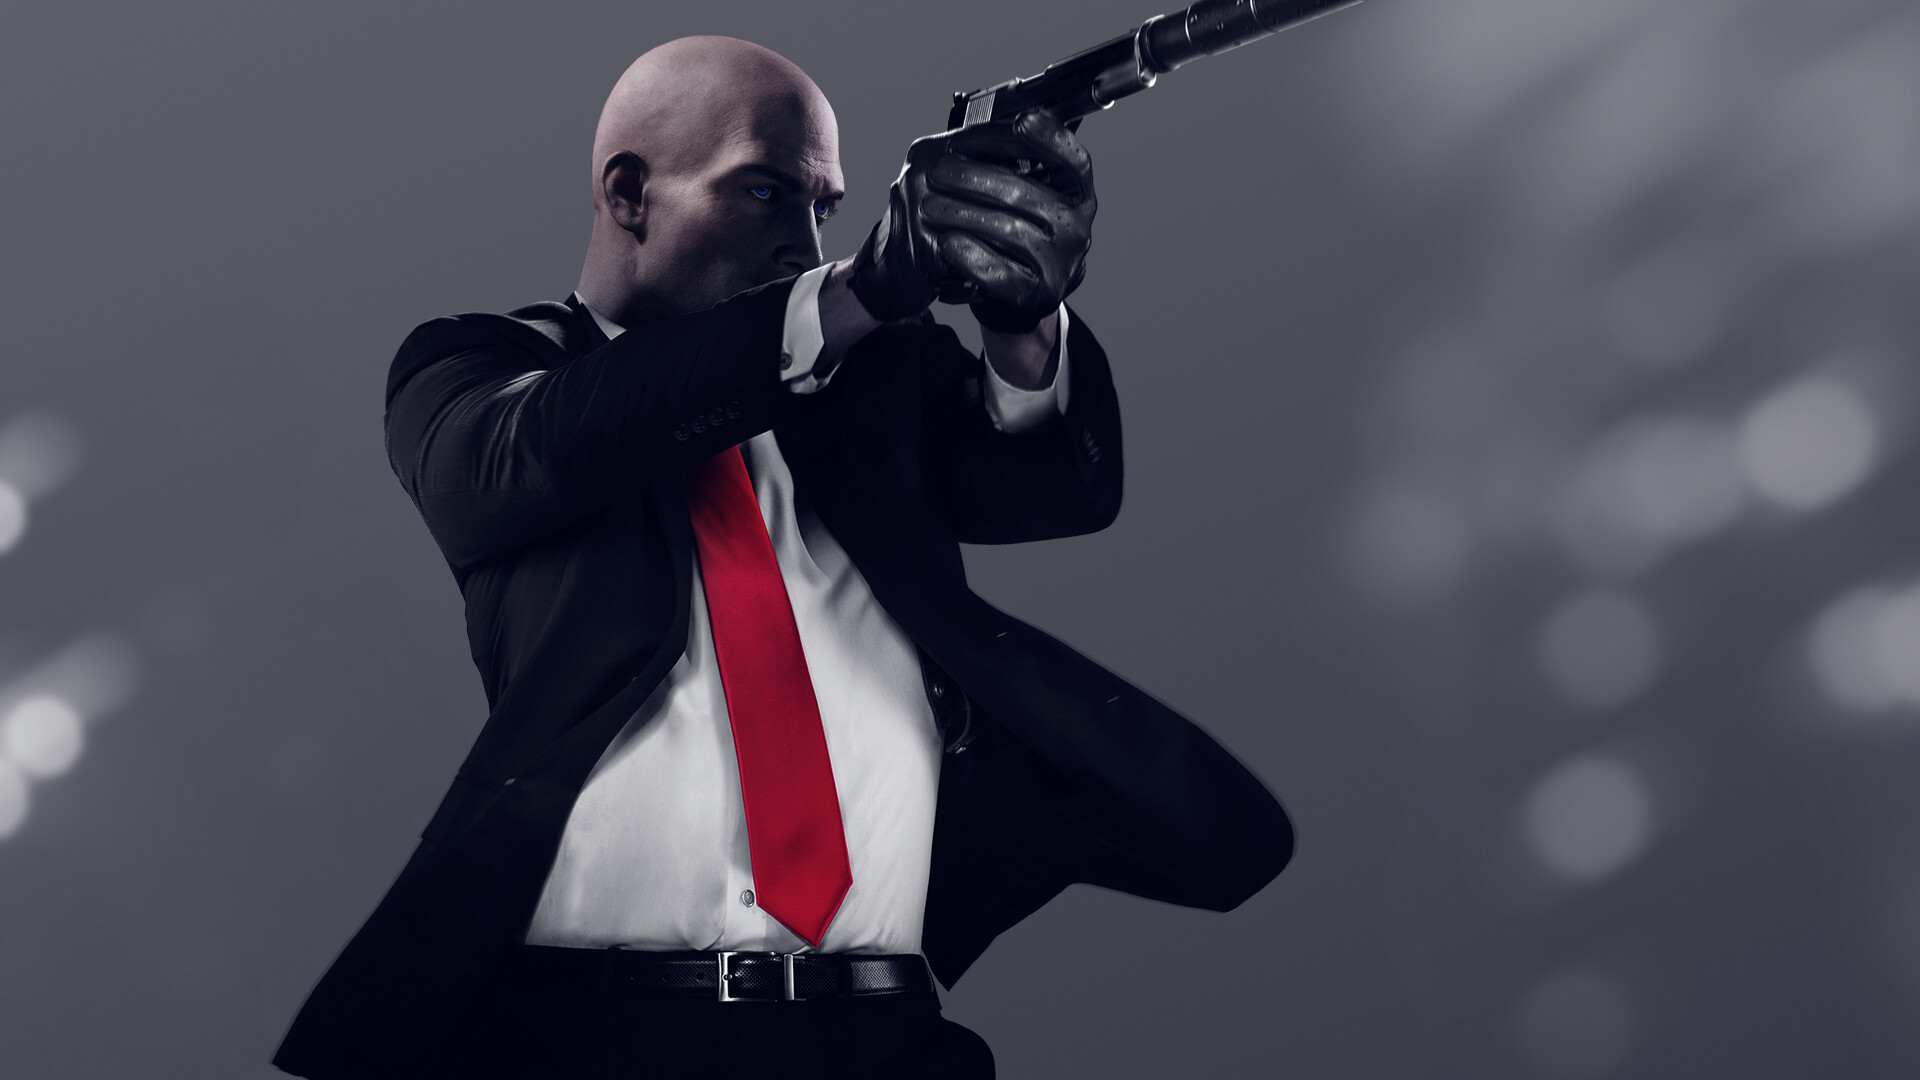 Hitman (Game): The game included two online multiplayer modes called Sniper Assassin and Ghost Mode. 1920x1080 Full HD Wallpaper.